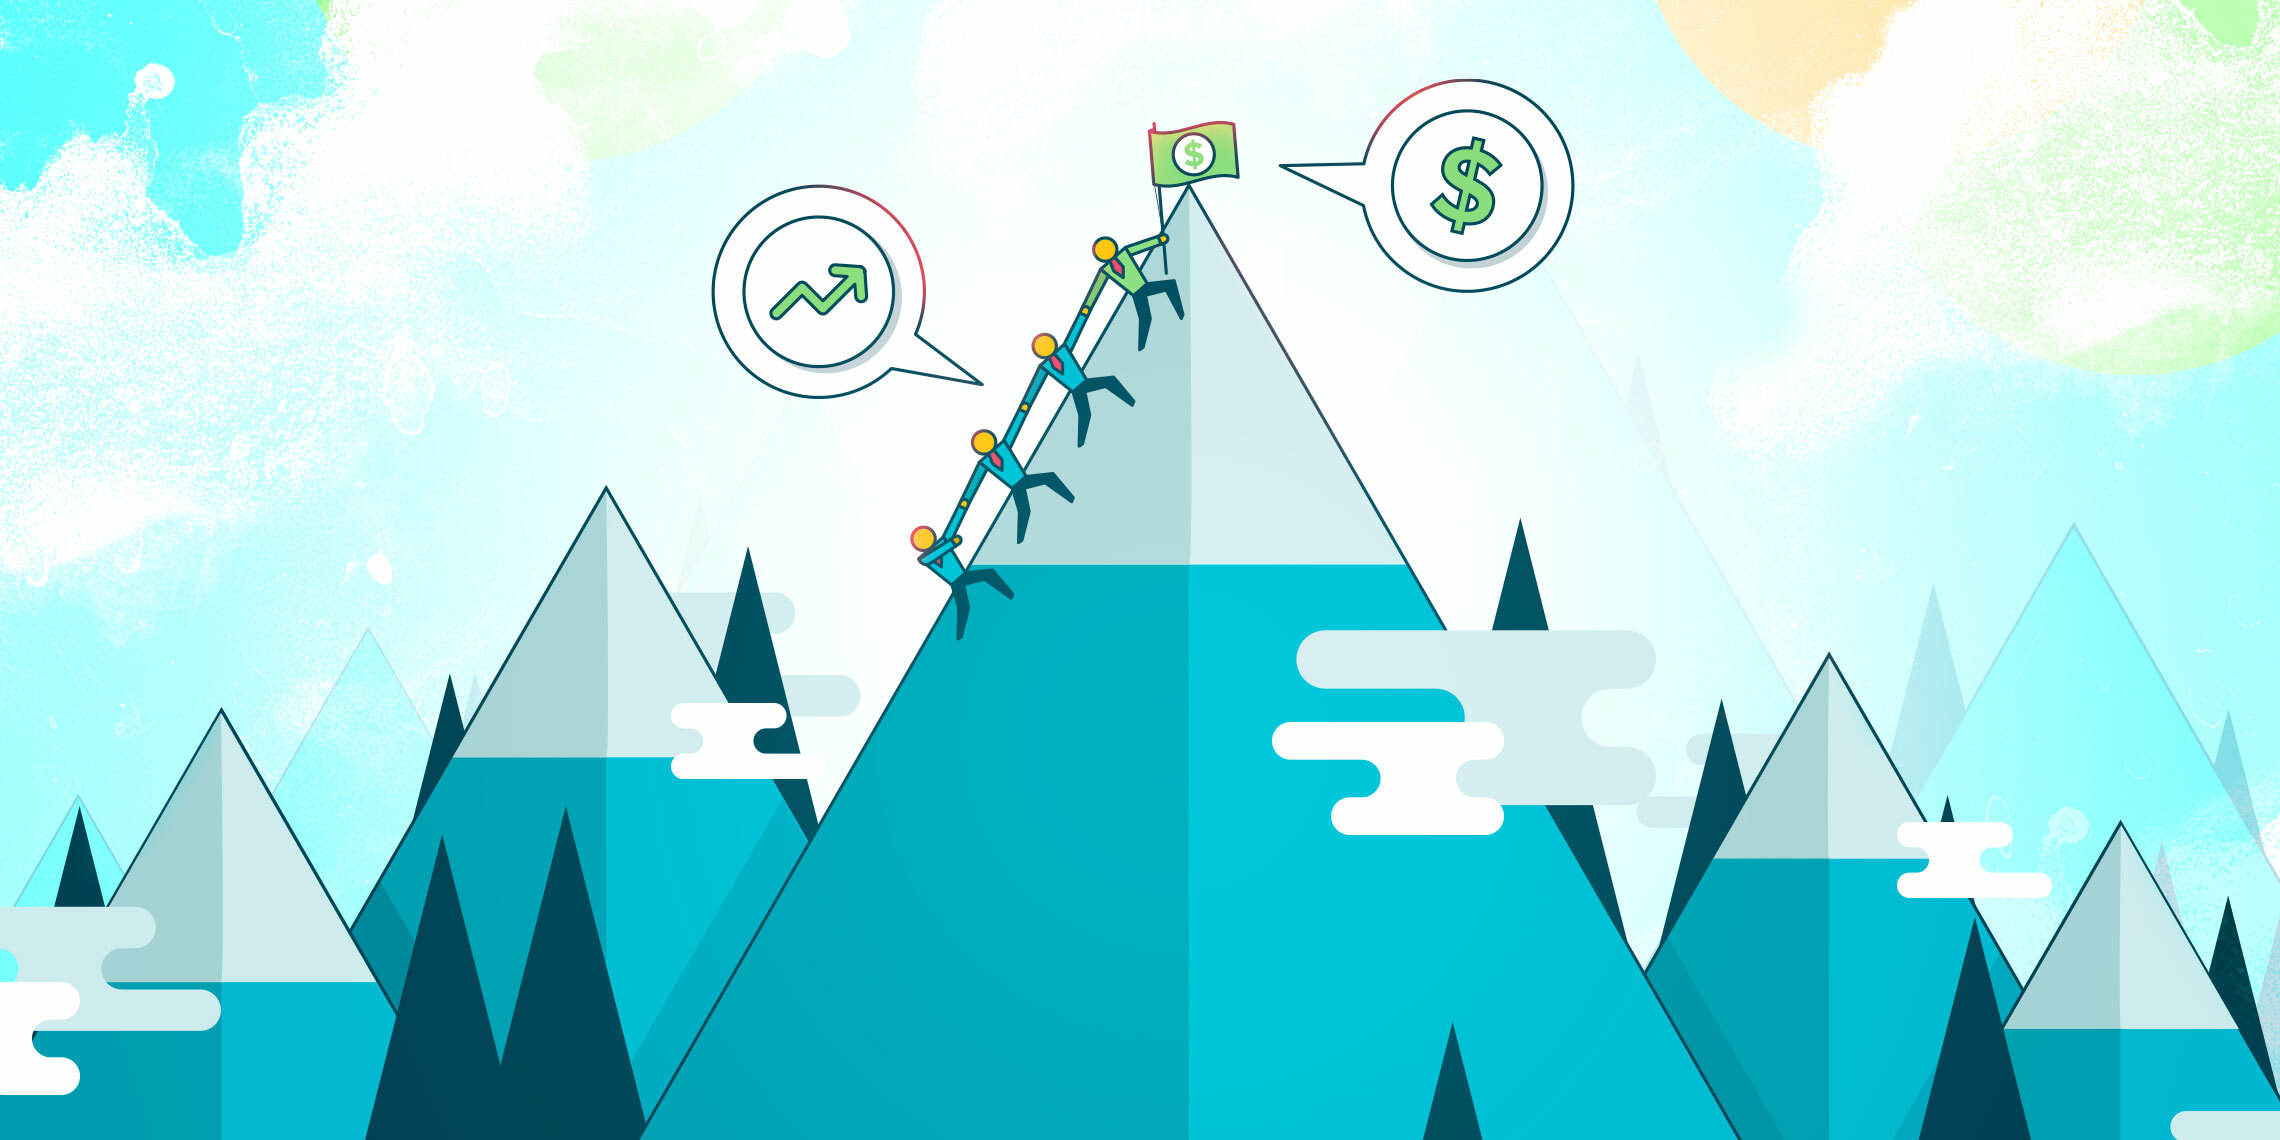 sales leaders getting to the top of a mountain after a sales slump